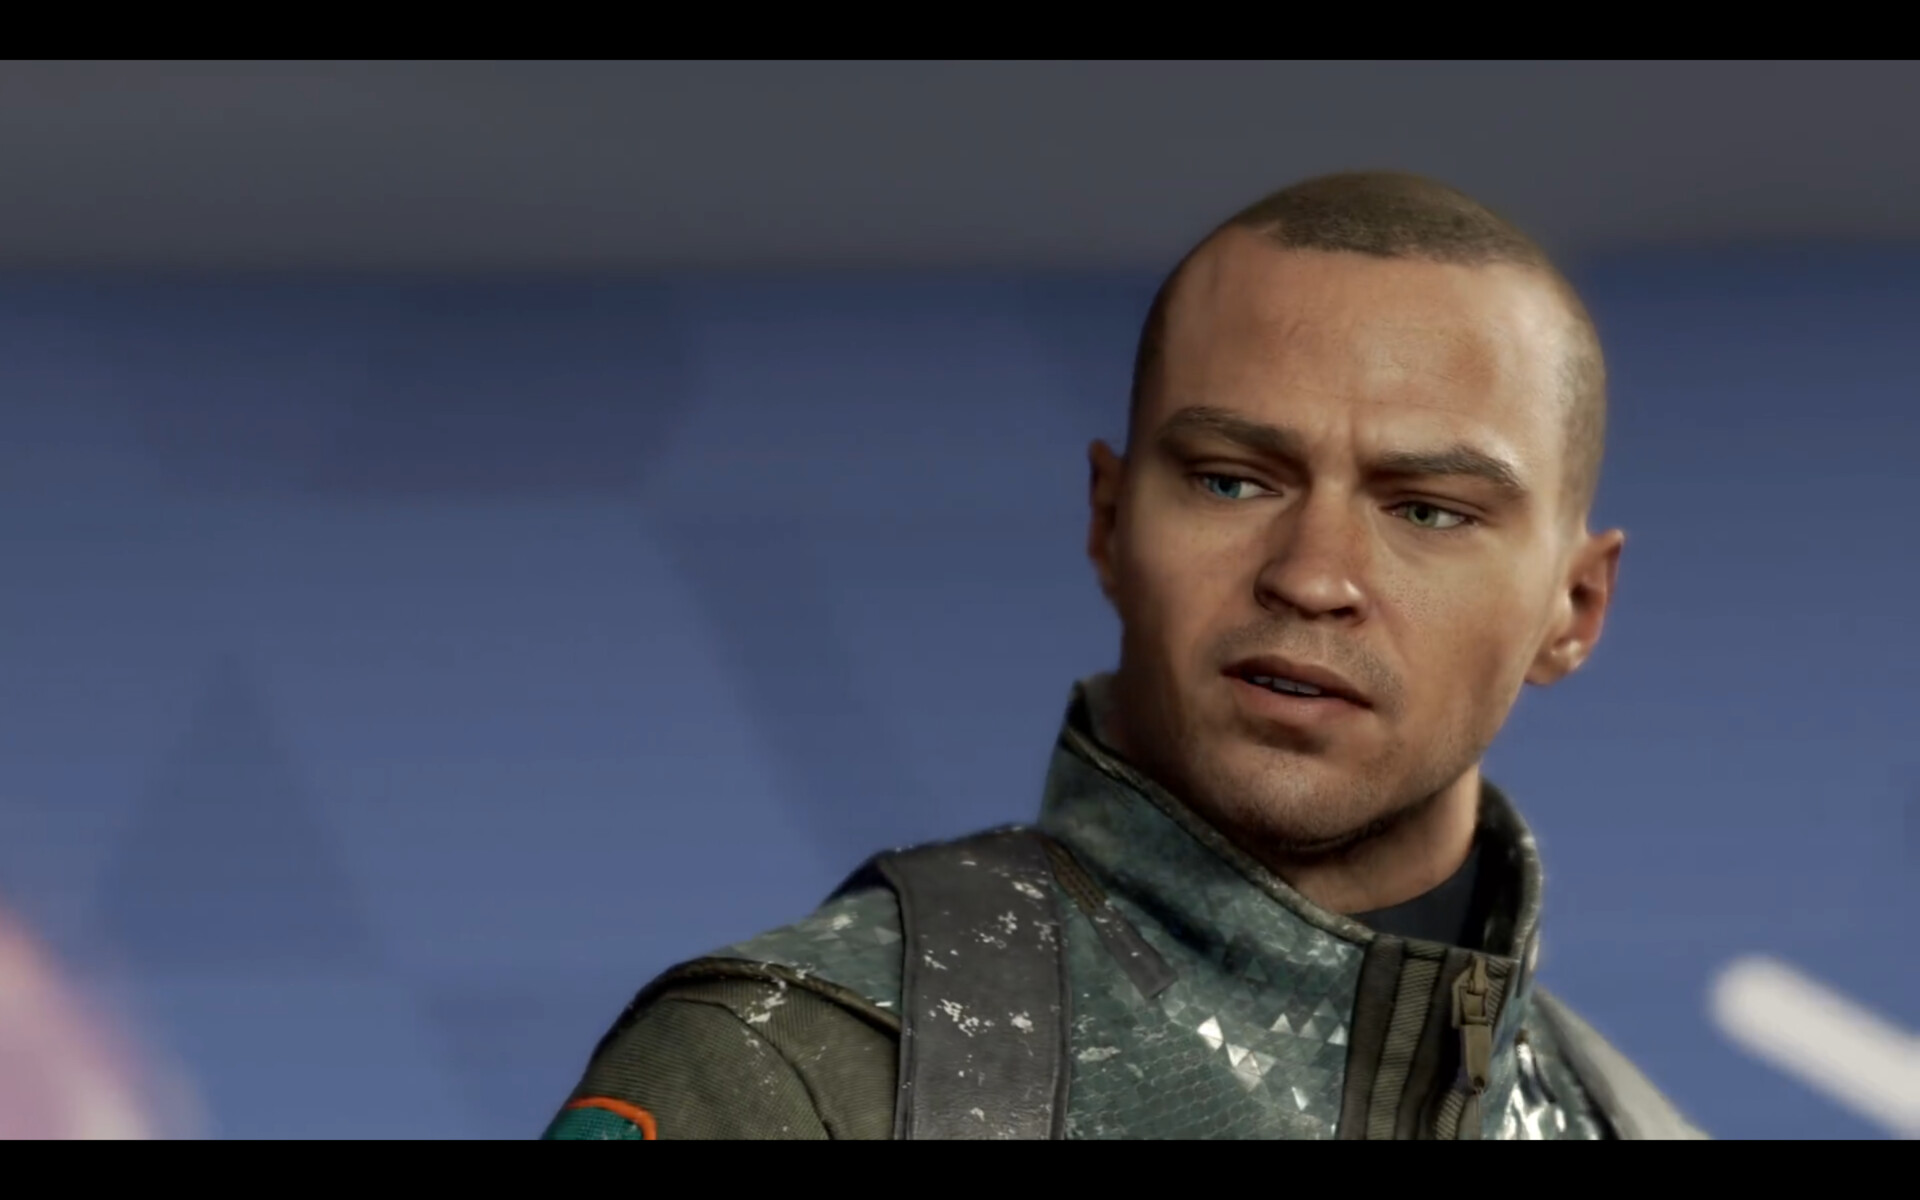 E3 2017: Detroit: Become Human, New Gameplay Trailer Unveiled